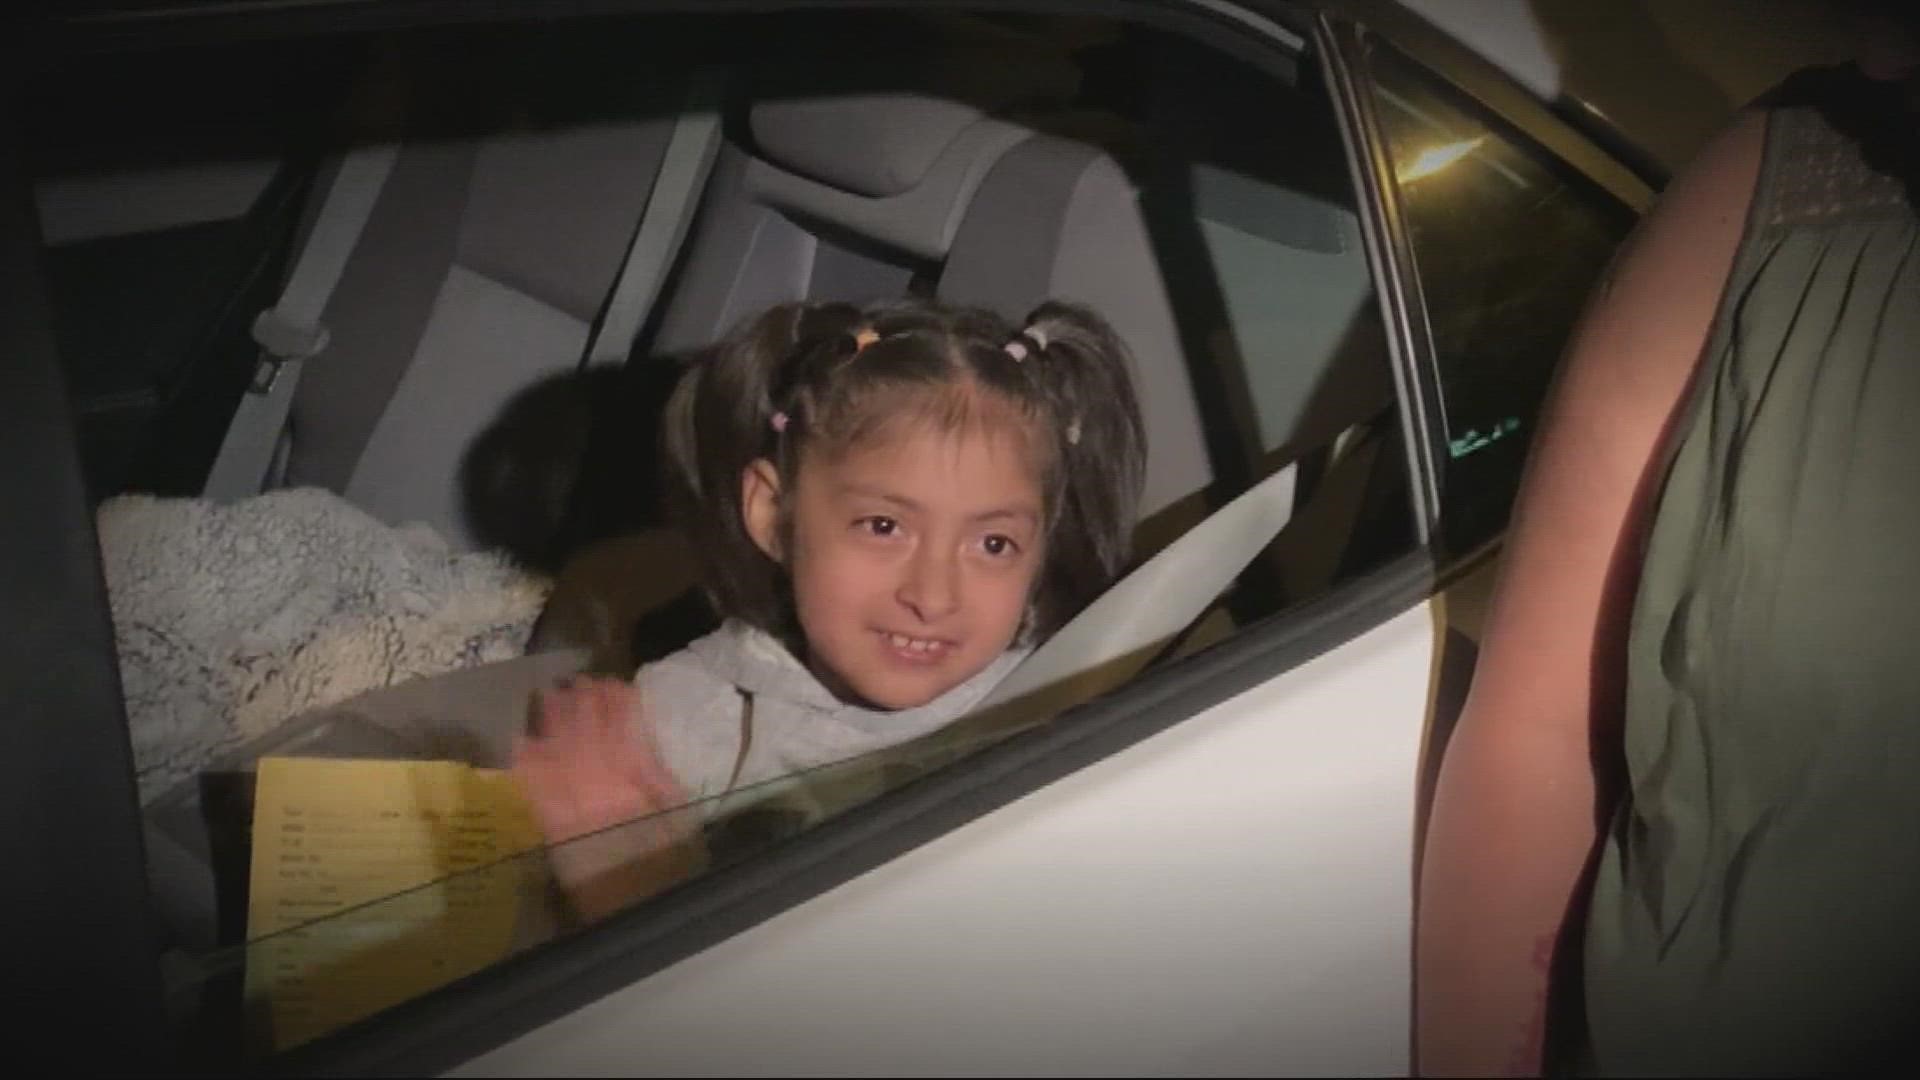 Though little Yamilet Martinez was gone for hours while the search unfolded, she was found unharmed in the car. Her mom said she may have slept through the ordeal.